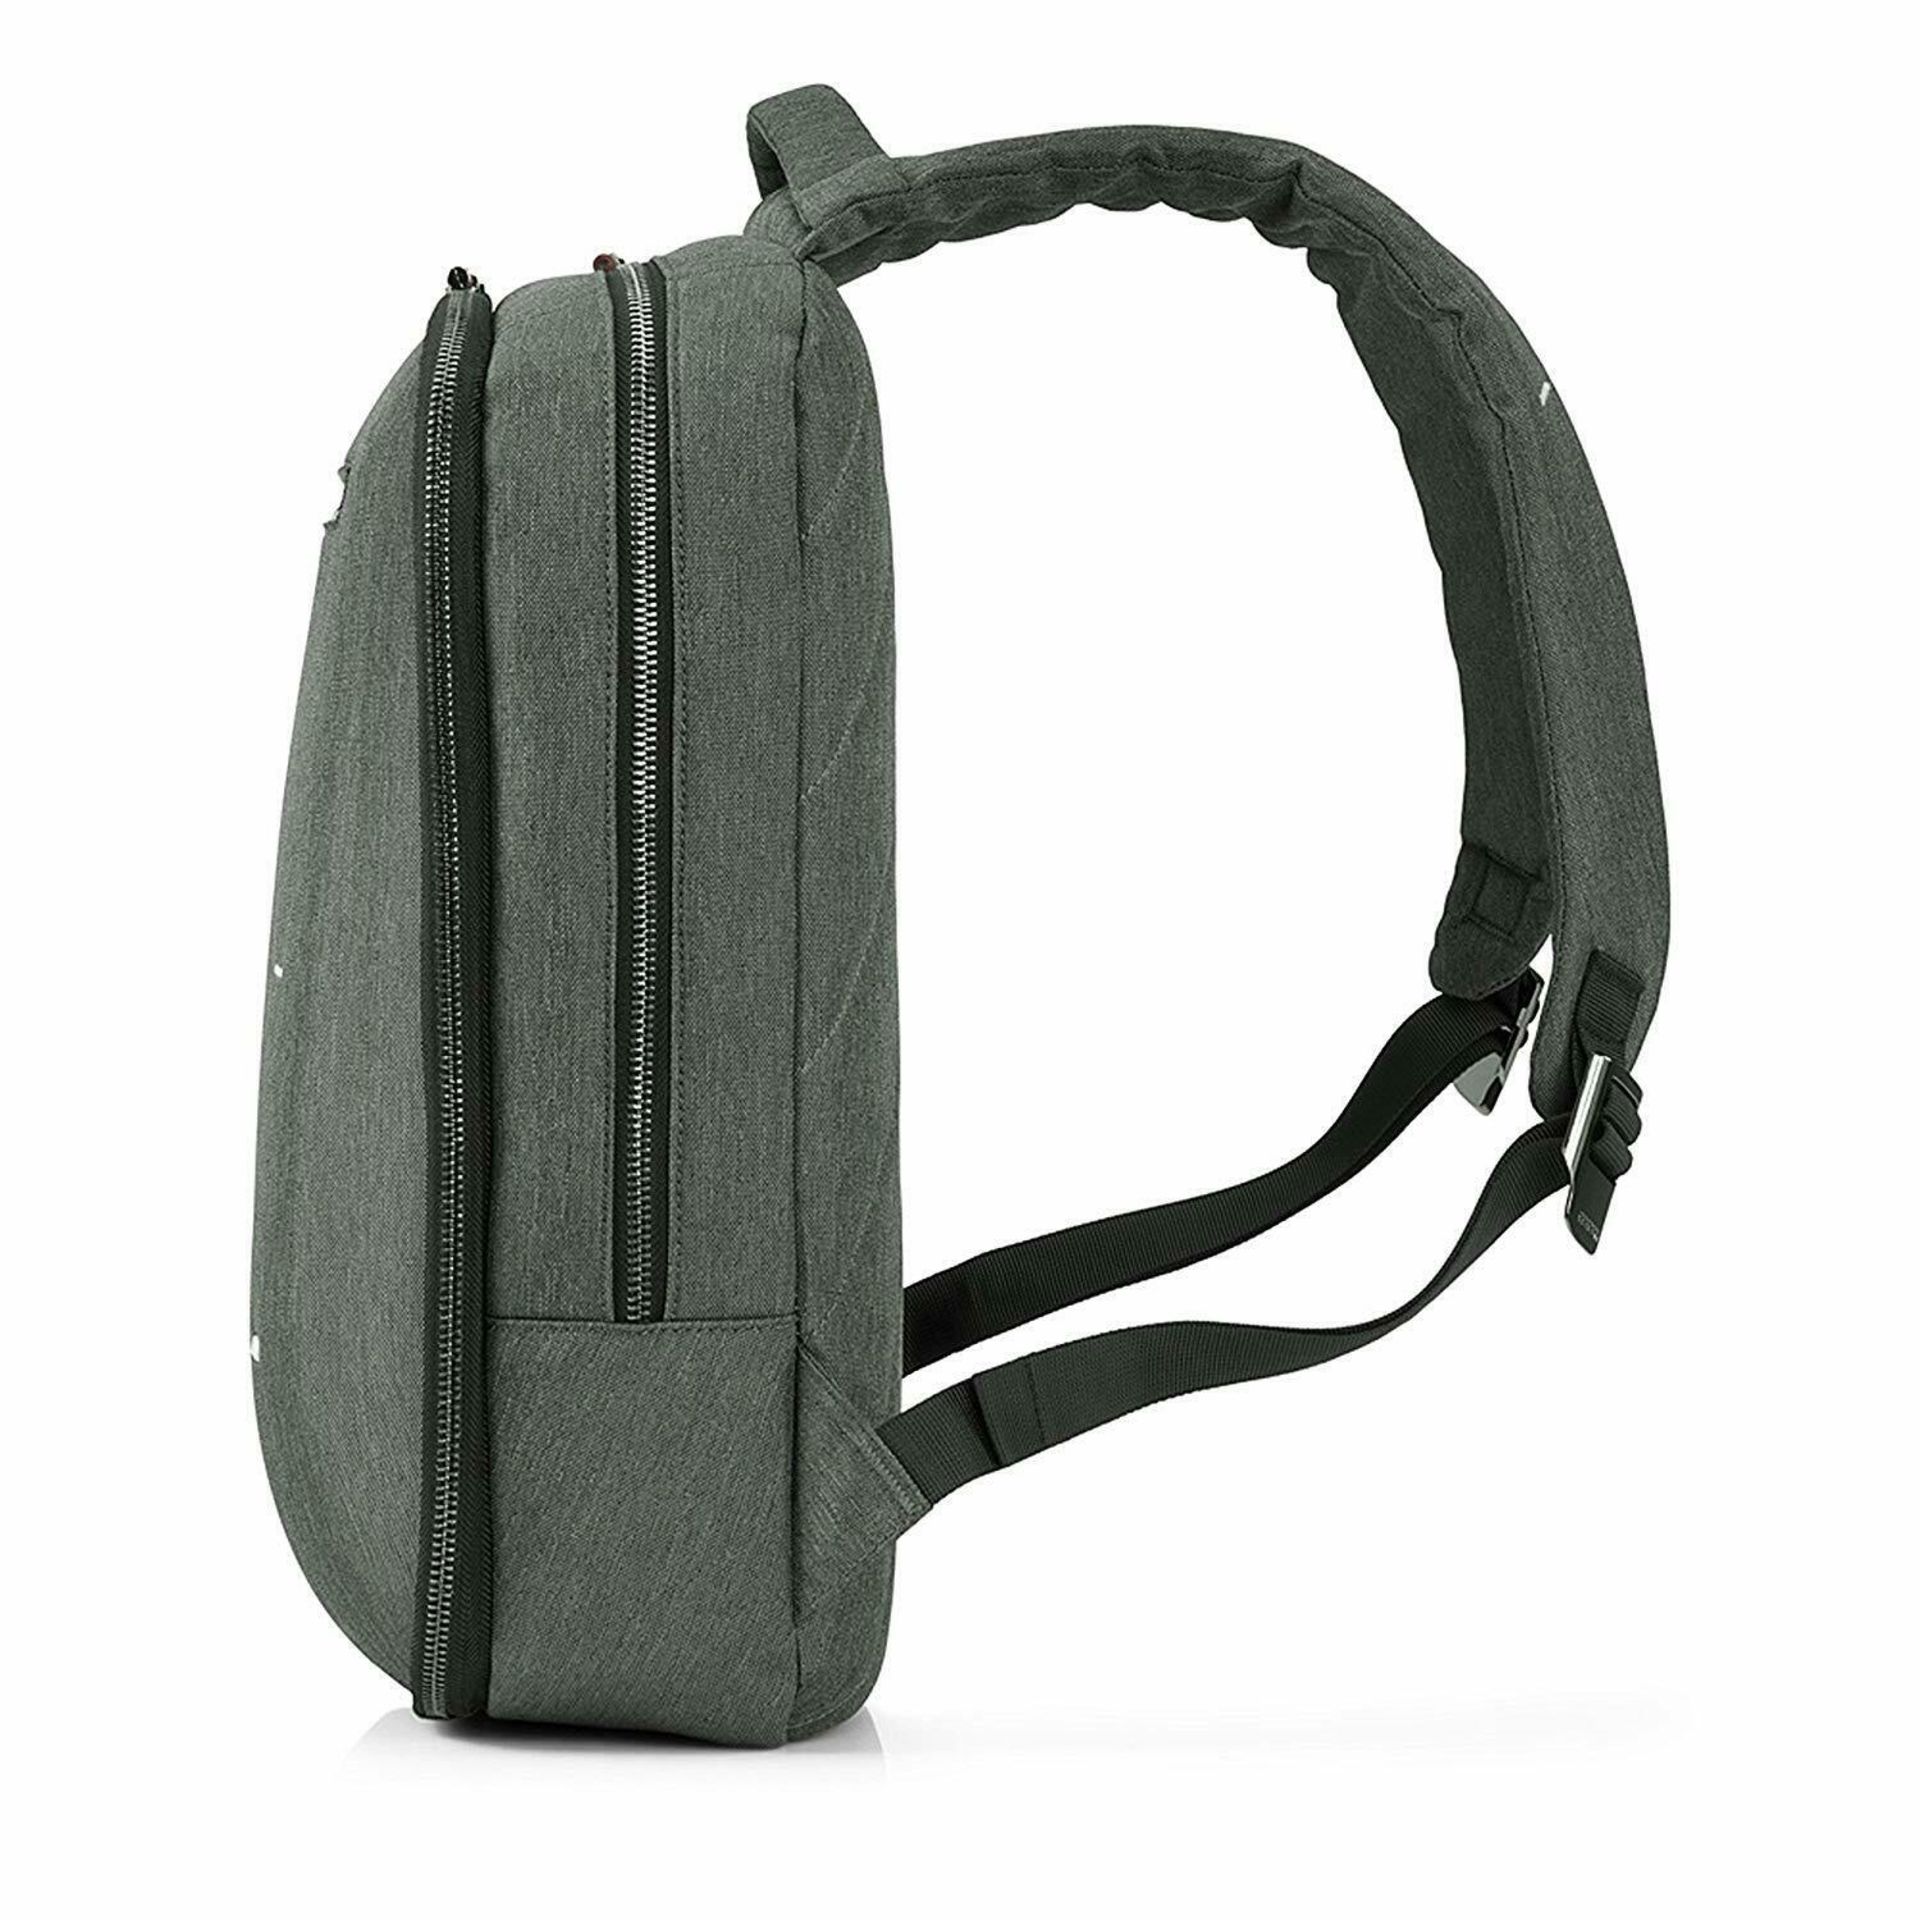 1 X Cocoon Backpack Macbook Graphite Rrp £49.99 - Image 2 of 2